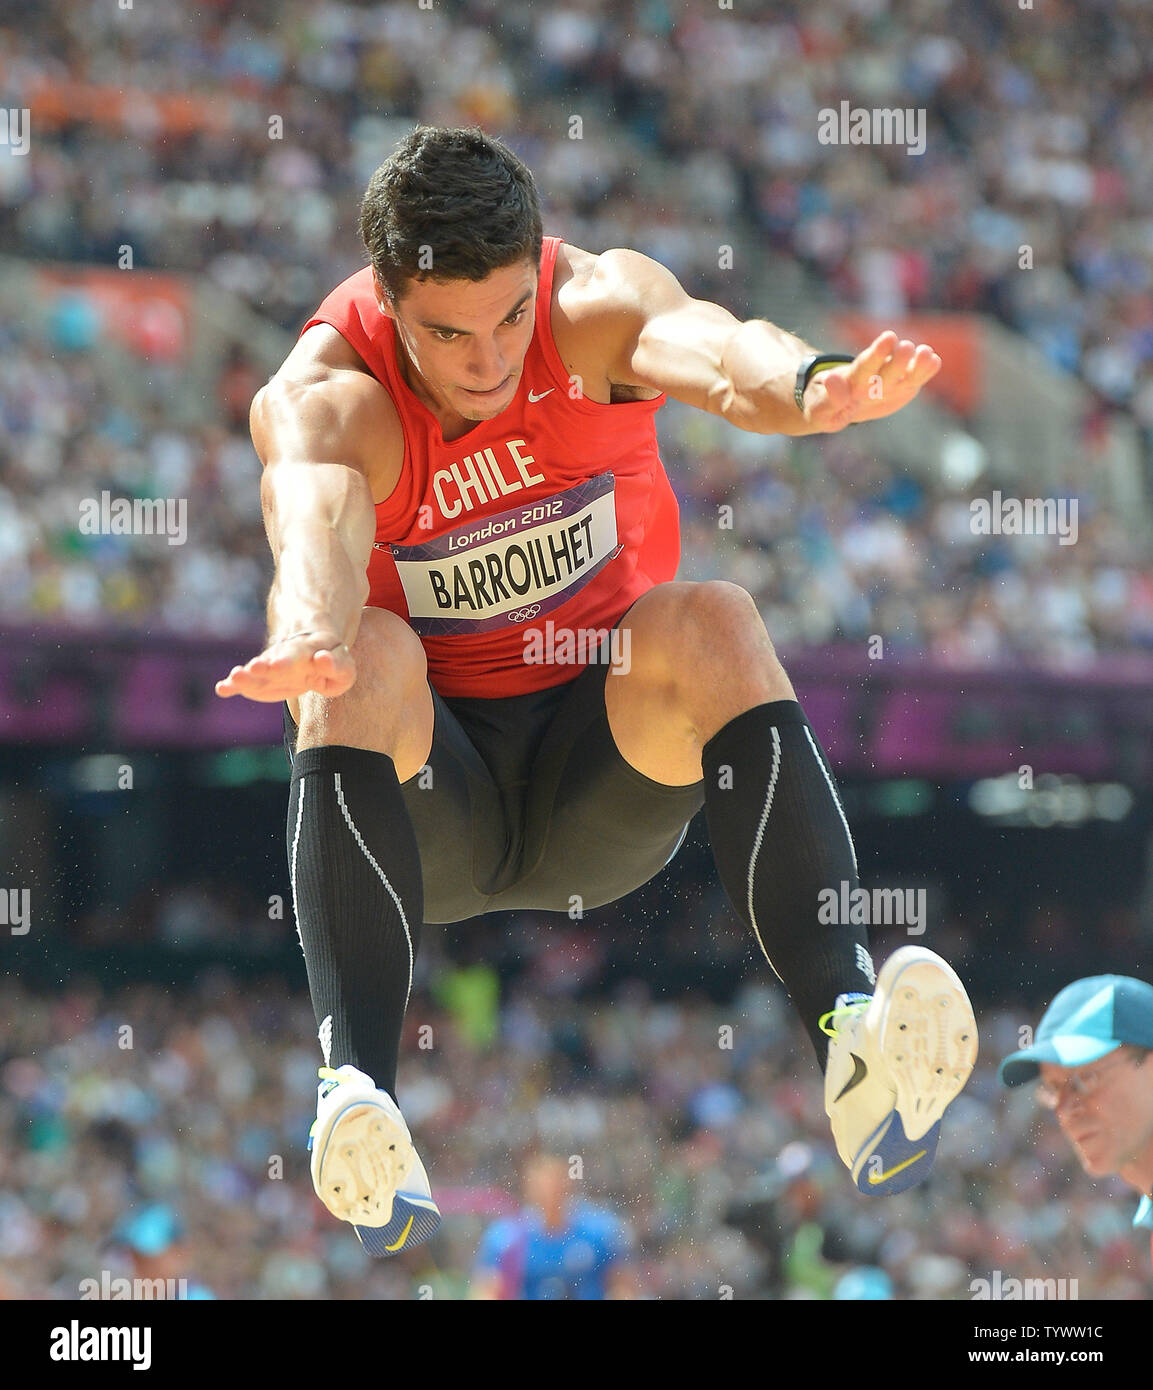 Gonzalo Barroilhet of Chile competes in 